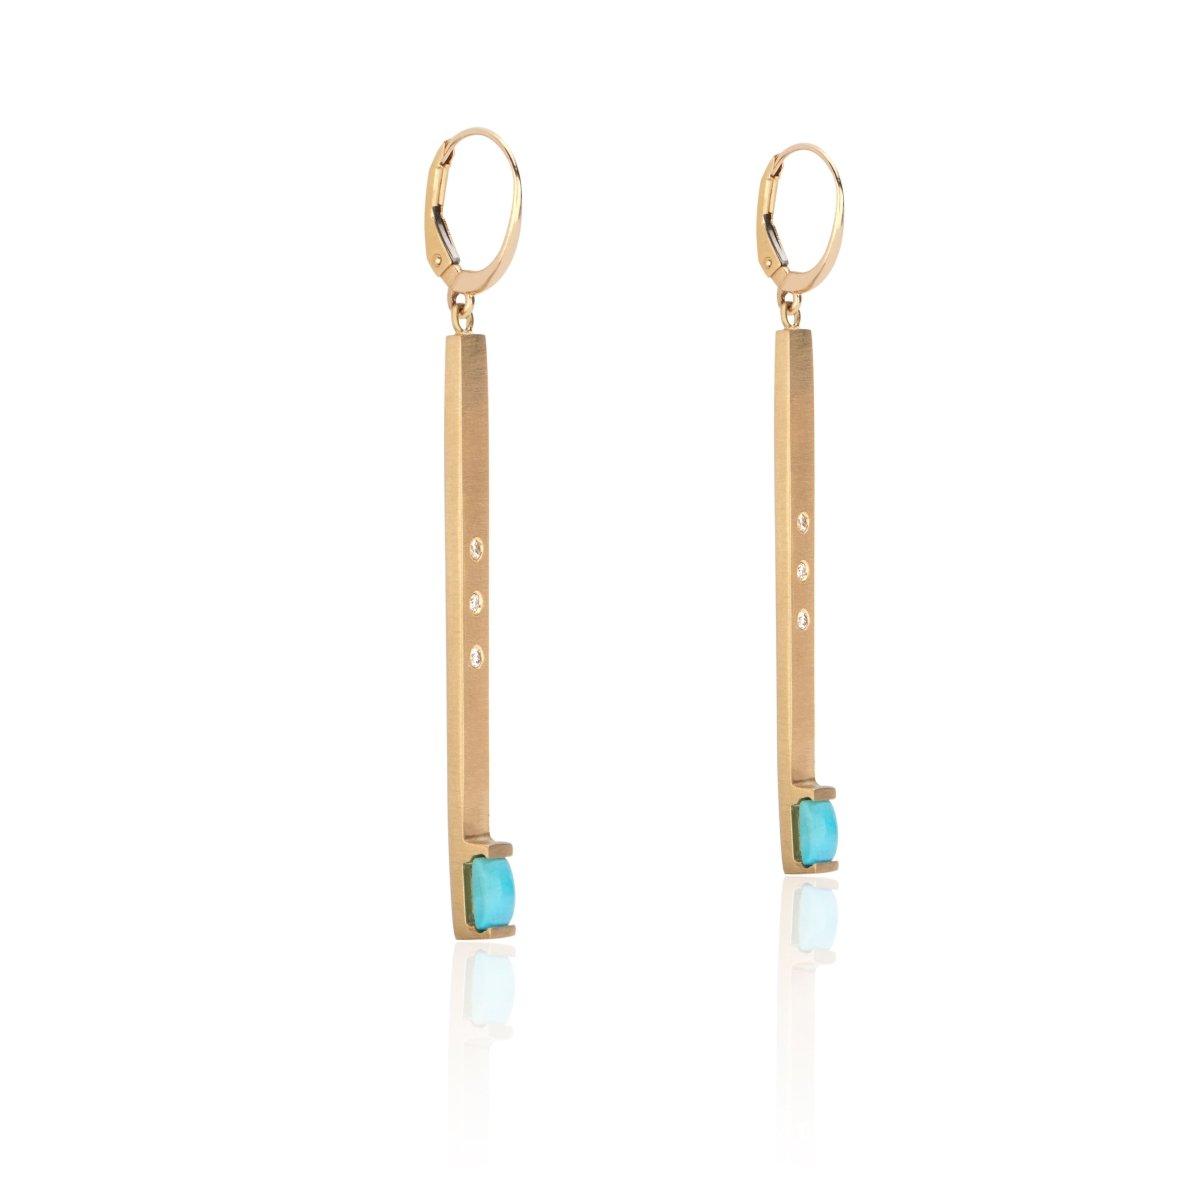 Turquoise Matchstick Earrings - Nataly Aponte